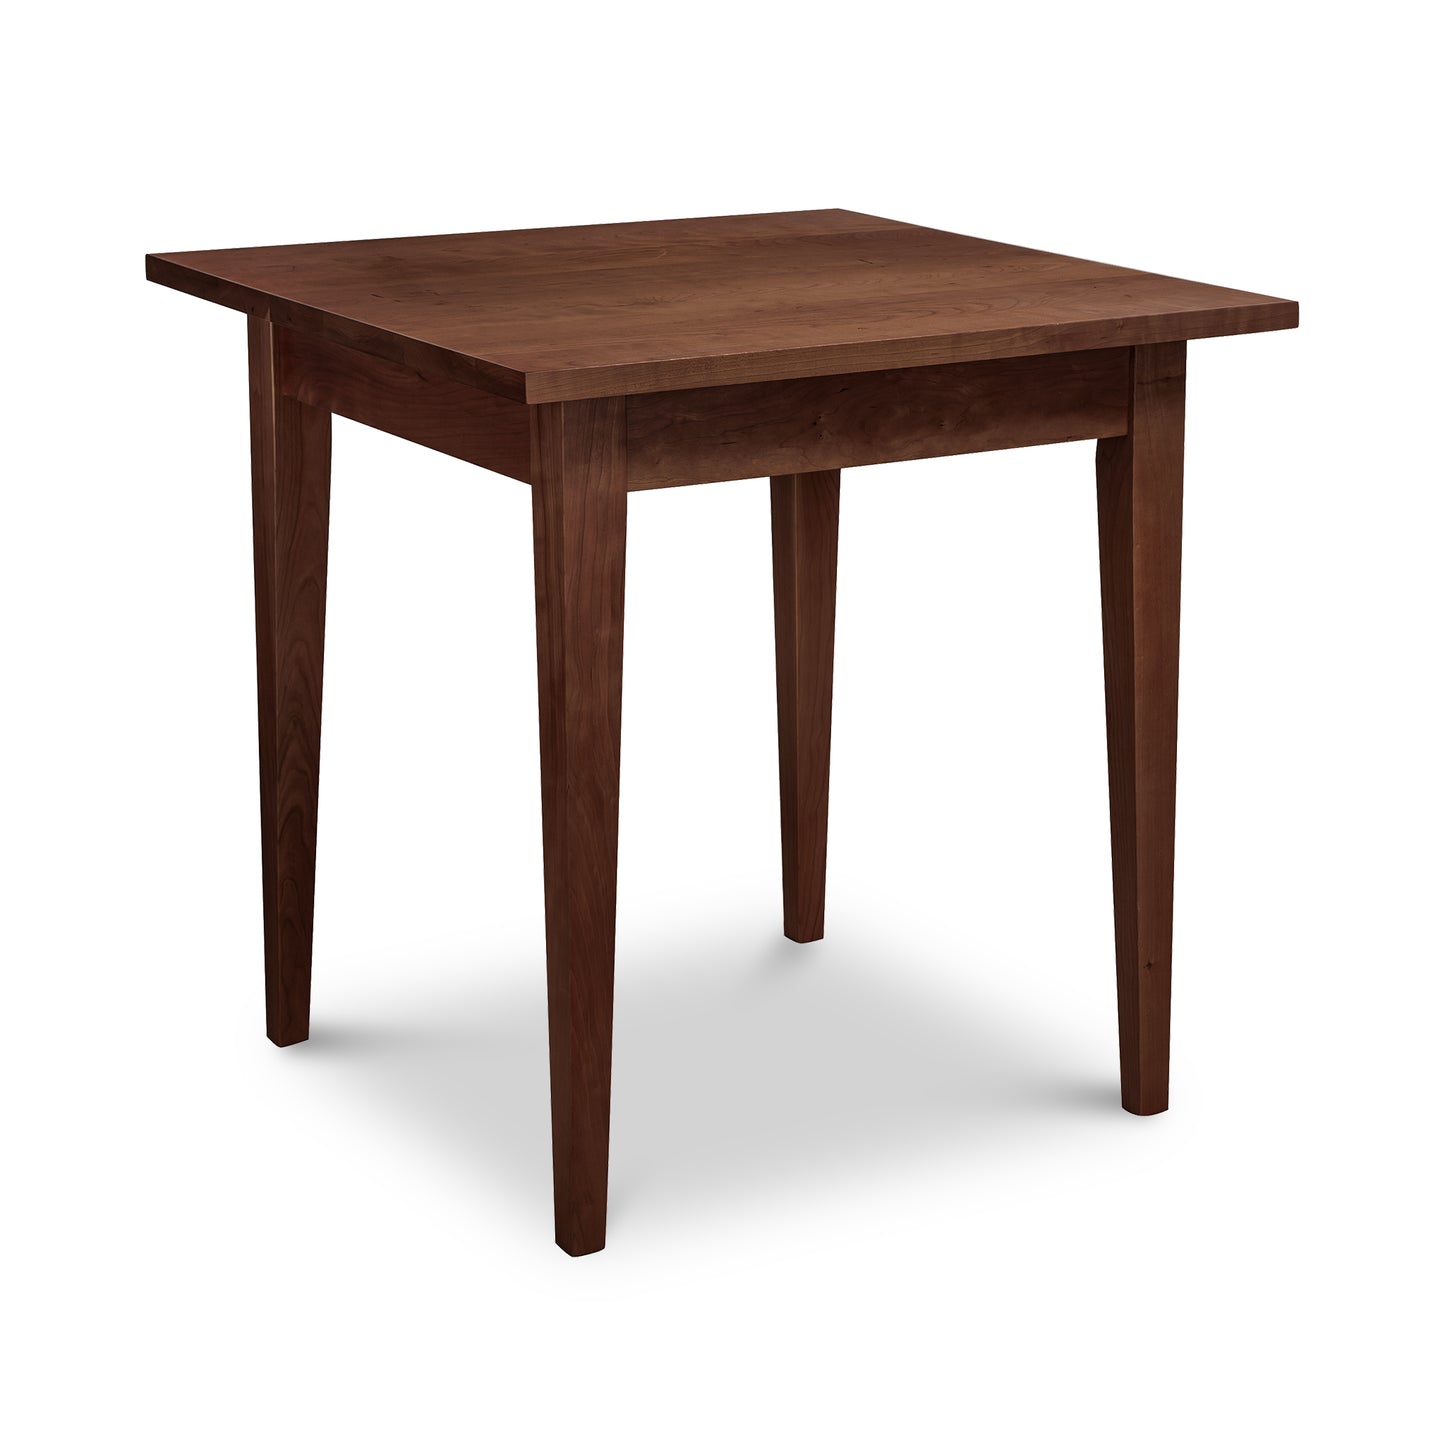 A Classic Shaker Square Dining Table with a wooden top and legs from the Lyndon Furniture Collection.